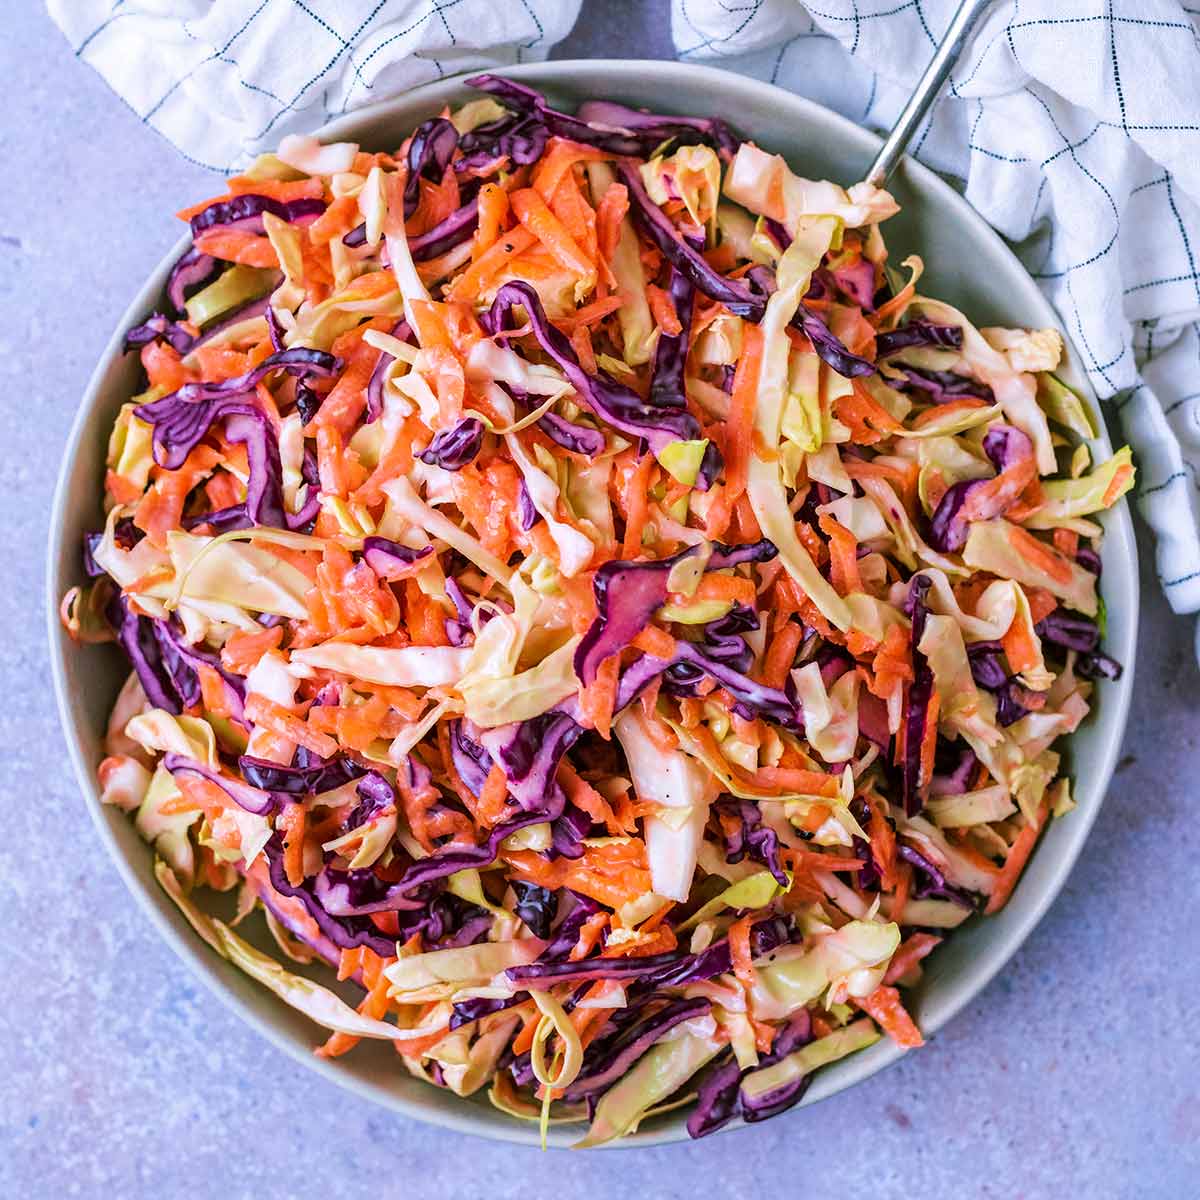 The Best Homemade Coleslaw Recipe (In Under 15 Minutes!)